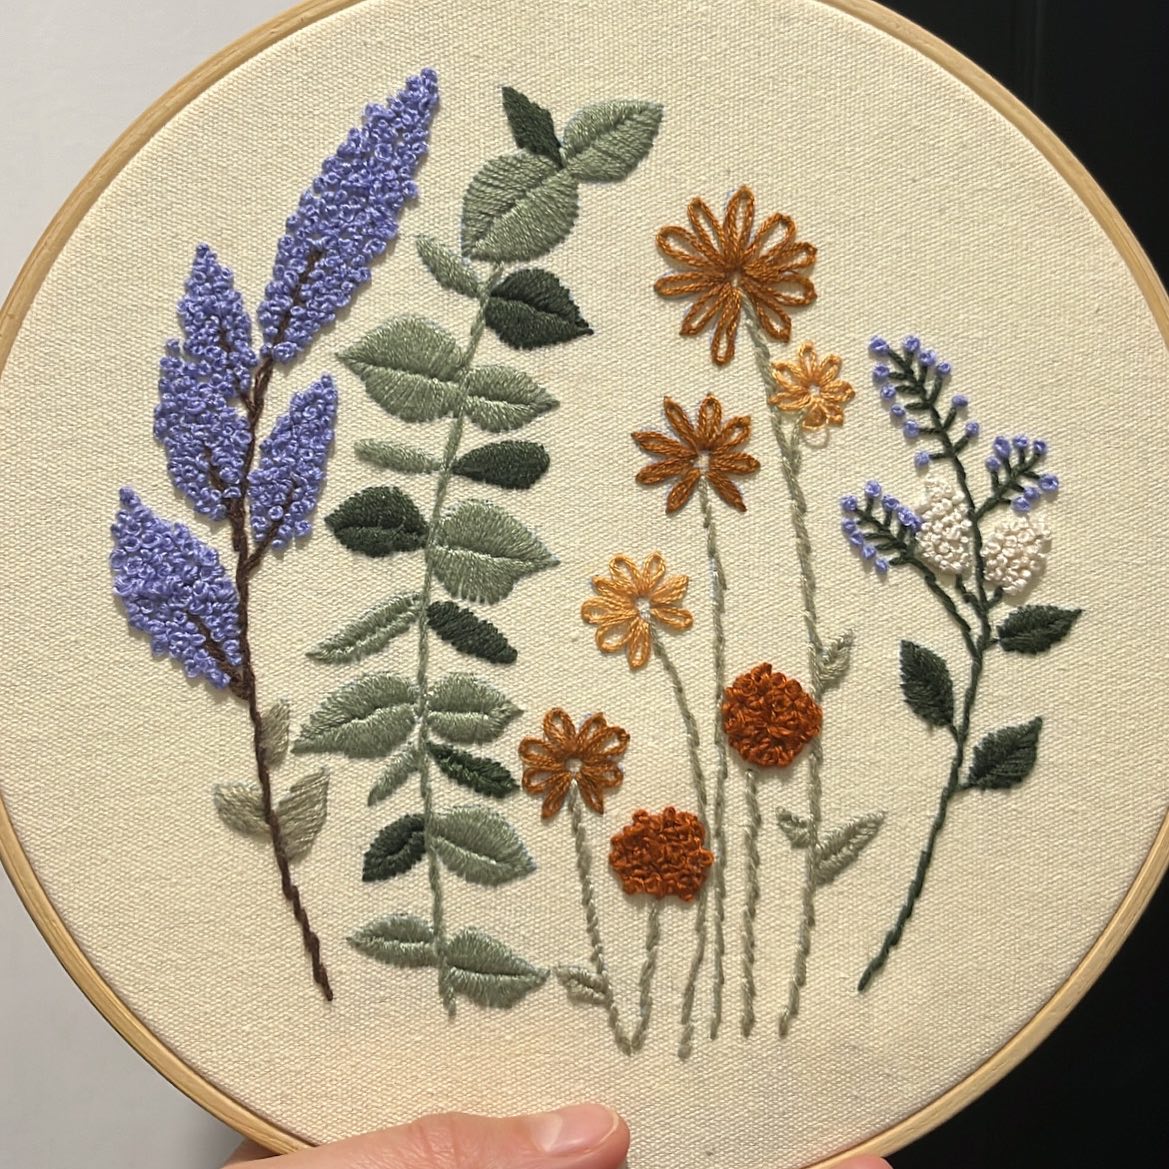 Finished my second hoop!!! 😁 #embroidery #embroideryhoop